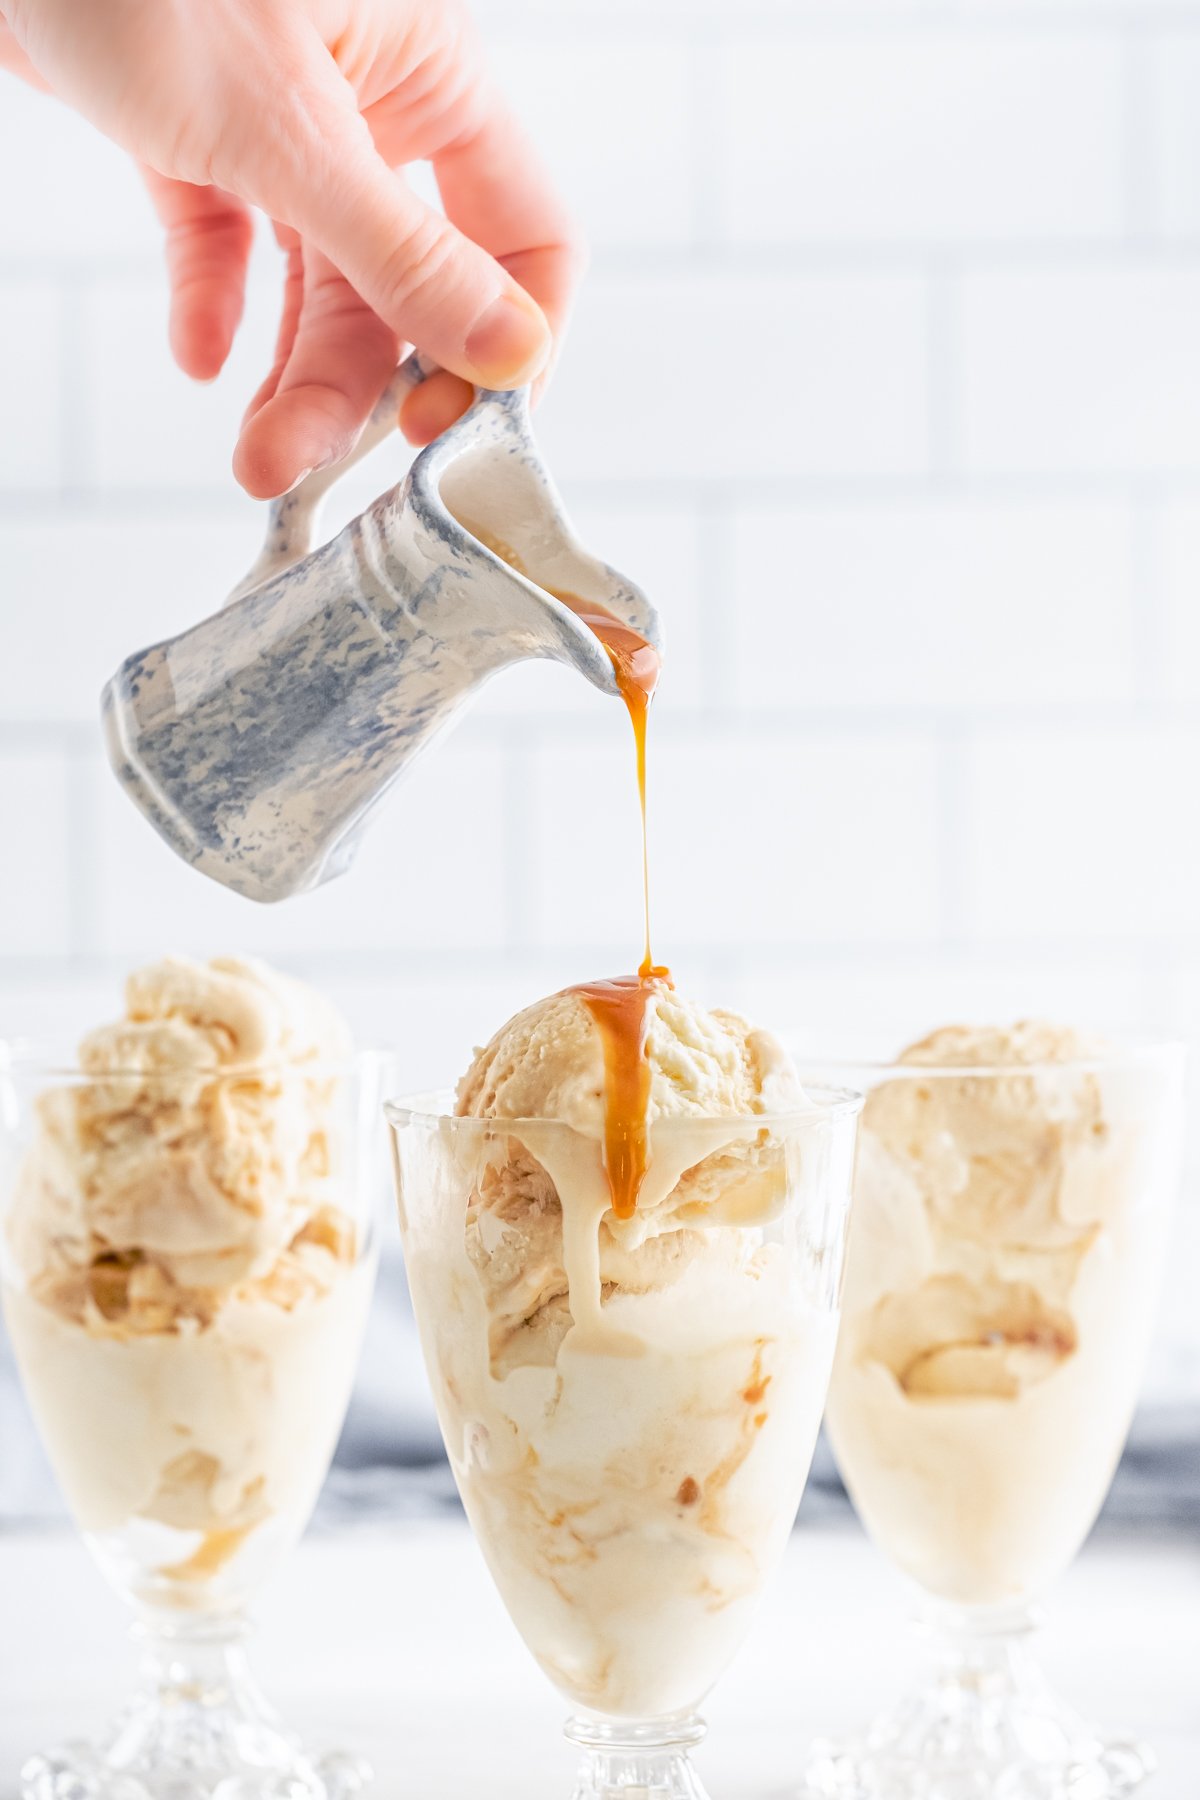 Caramel sauce being poured over on glass of ice cream